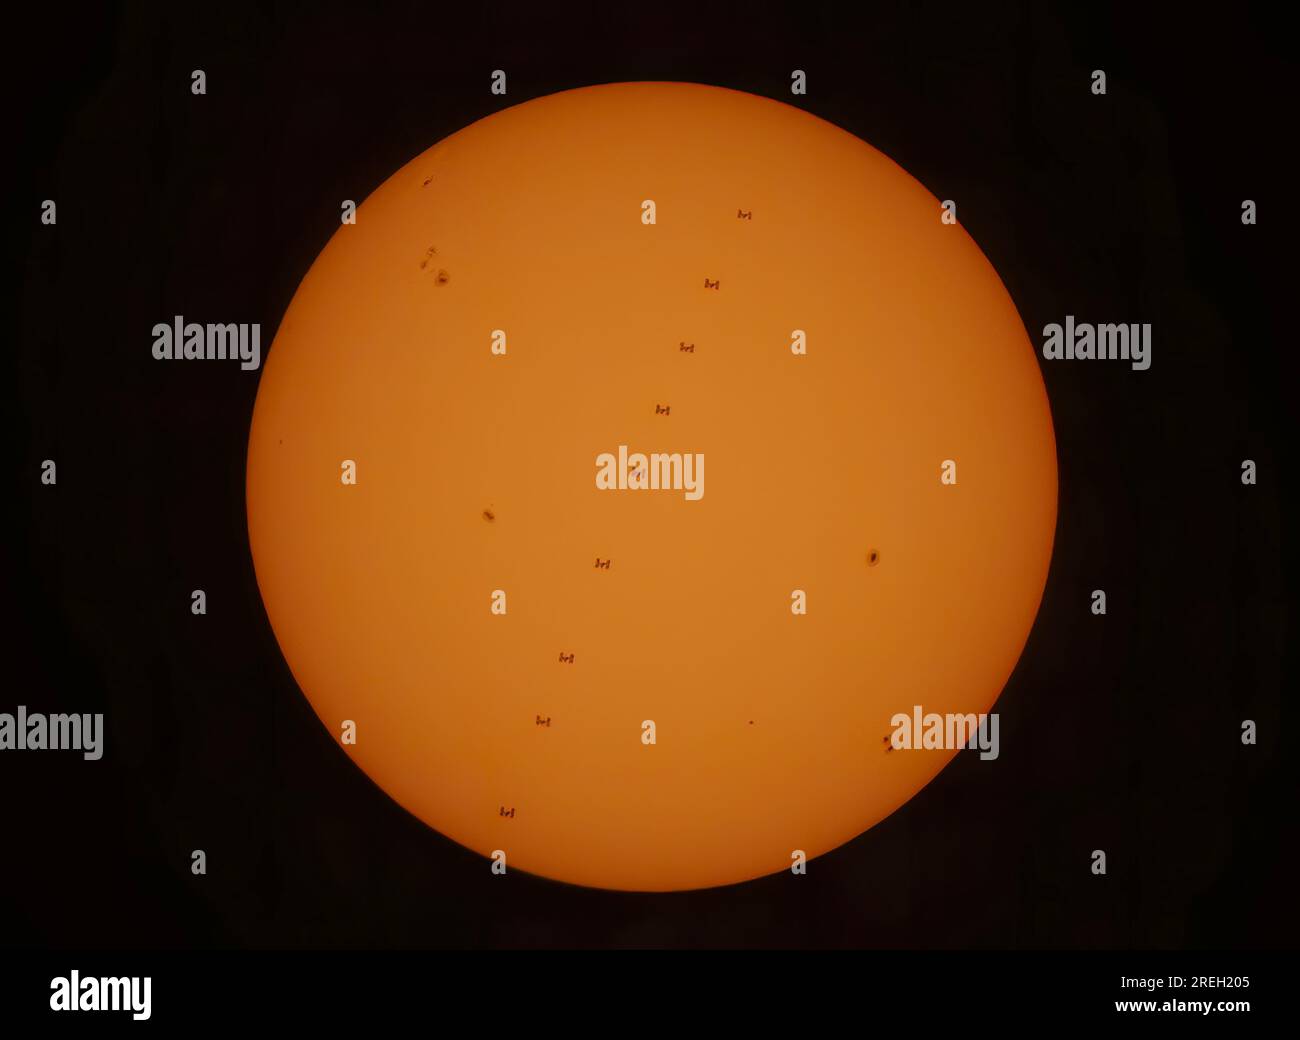 International Space Station (ISS) transiting across the face of the sun, a composite of several photos Arnprior, Canada July 27, 2023 Stock Photo